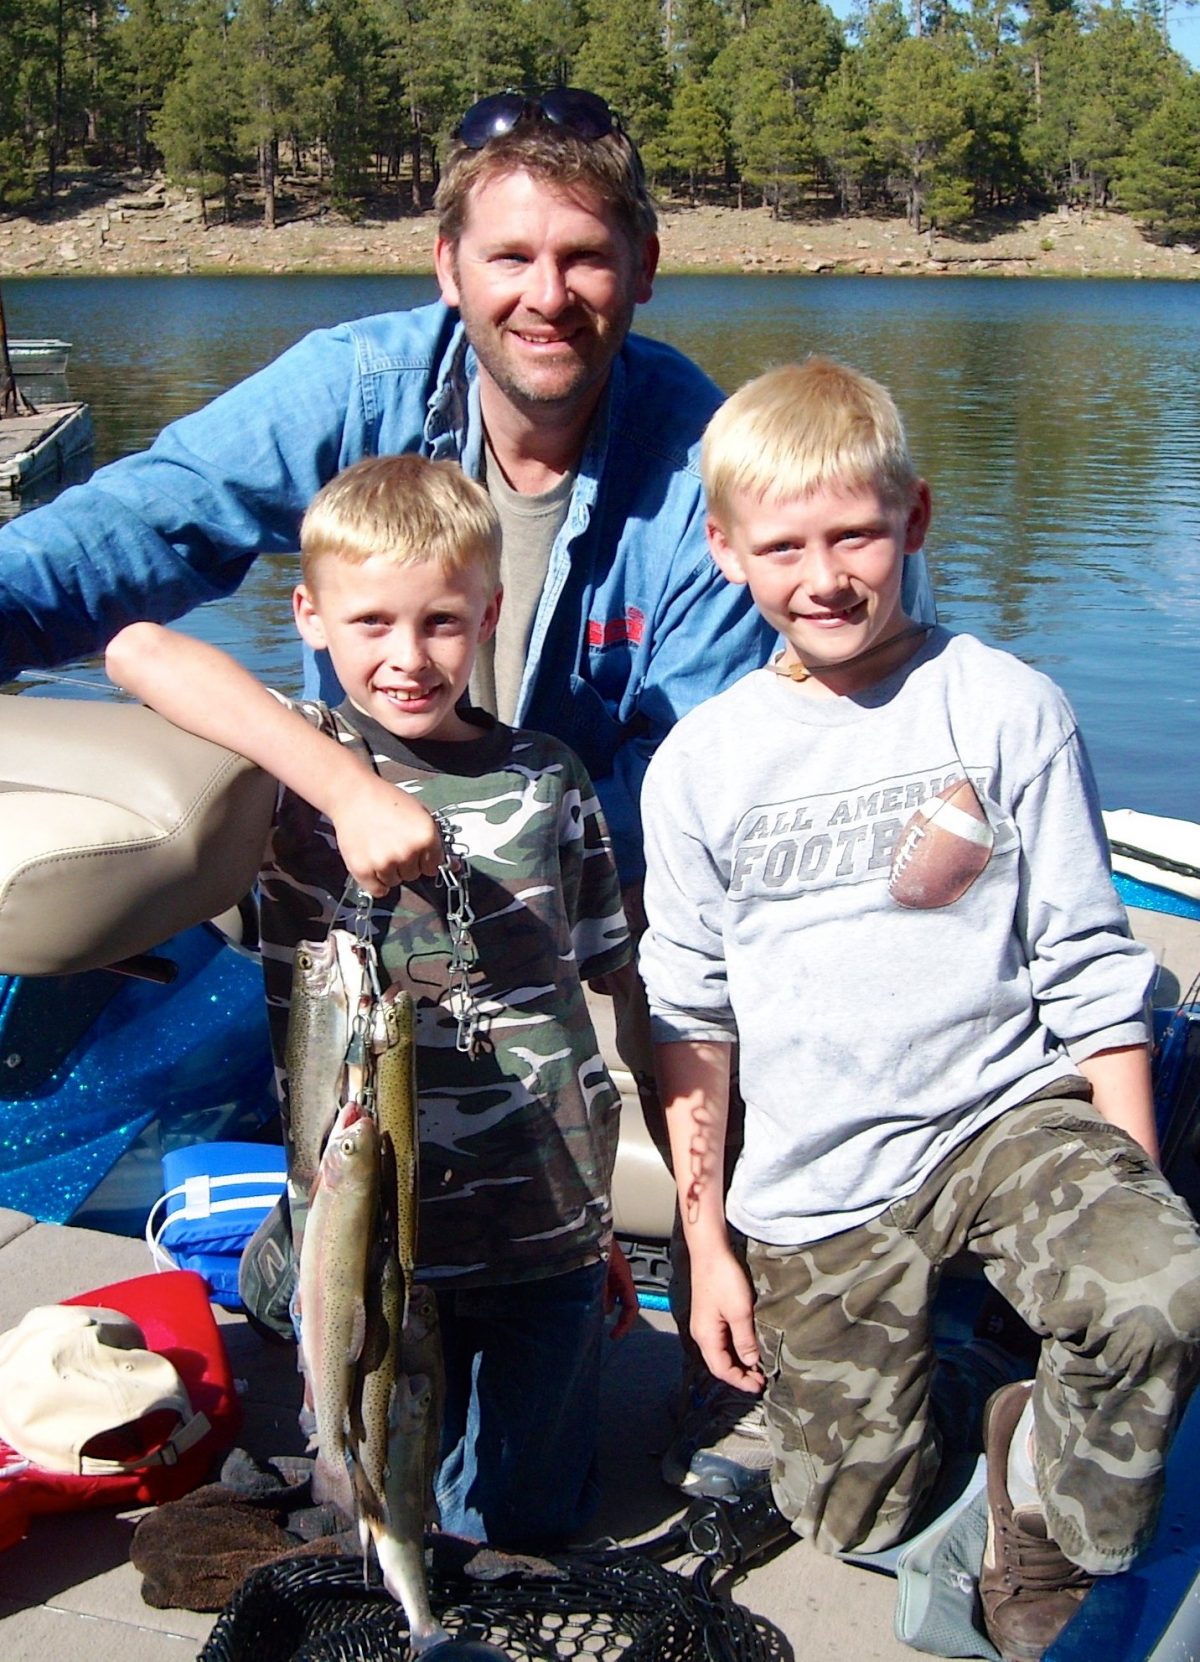 father with 2 children after catching fish in AZ lake